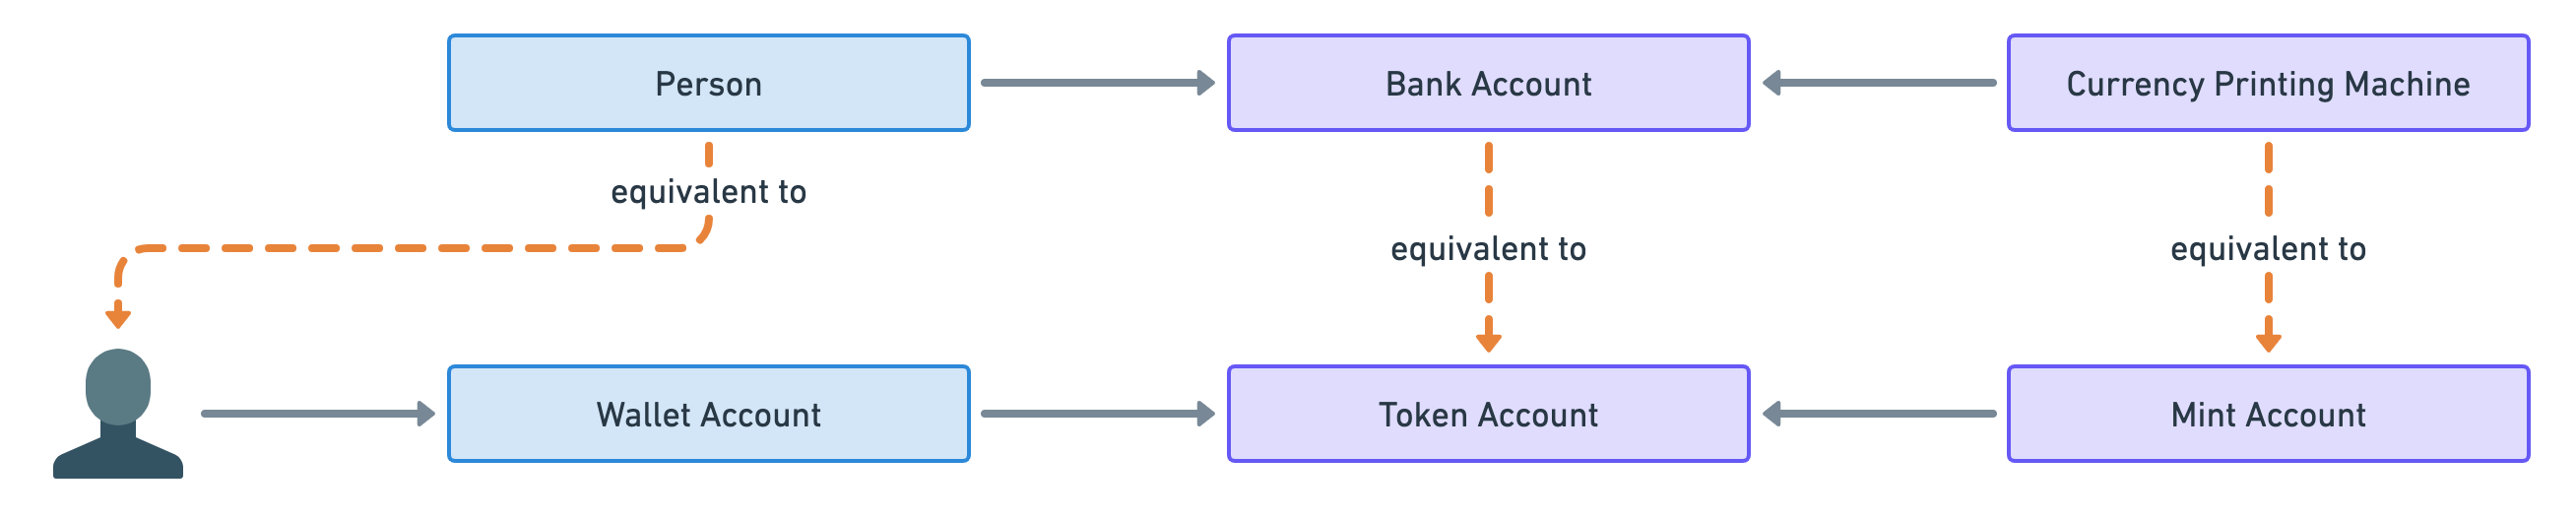 Diagram showing a “Person” linked to a “Bank Account” which is linked to a “Currency Printing Machine”. It also shows a user icon linked to a “Wallet Account” linked to a “Token Account” which is linked to a “Mint Account”. Dashed arrows labelled “equivalent to” pointing from person to the user icon; from bank account to token account and from “Currency Printing Machine” to mint account highlight the analogy.